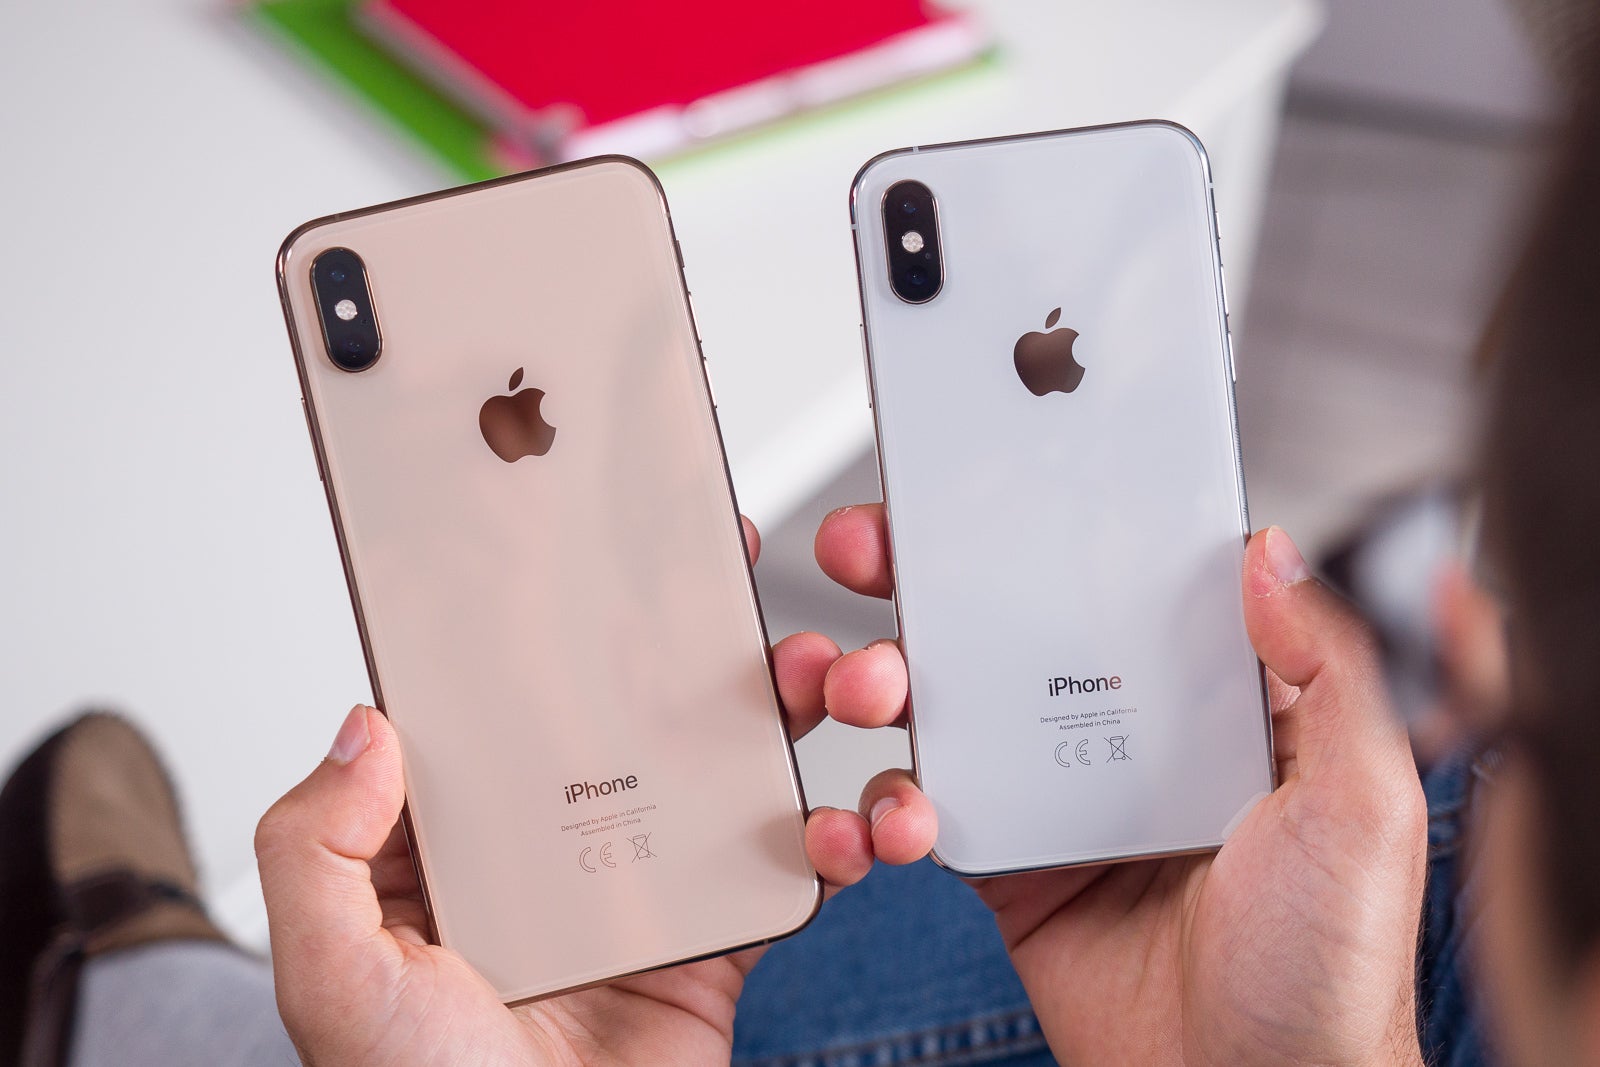 Order are on par with last year's - Apple iPhone 11 suppliers are reporting low component orders